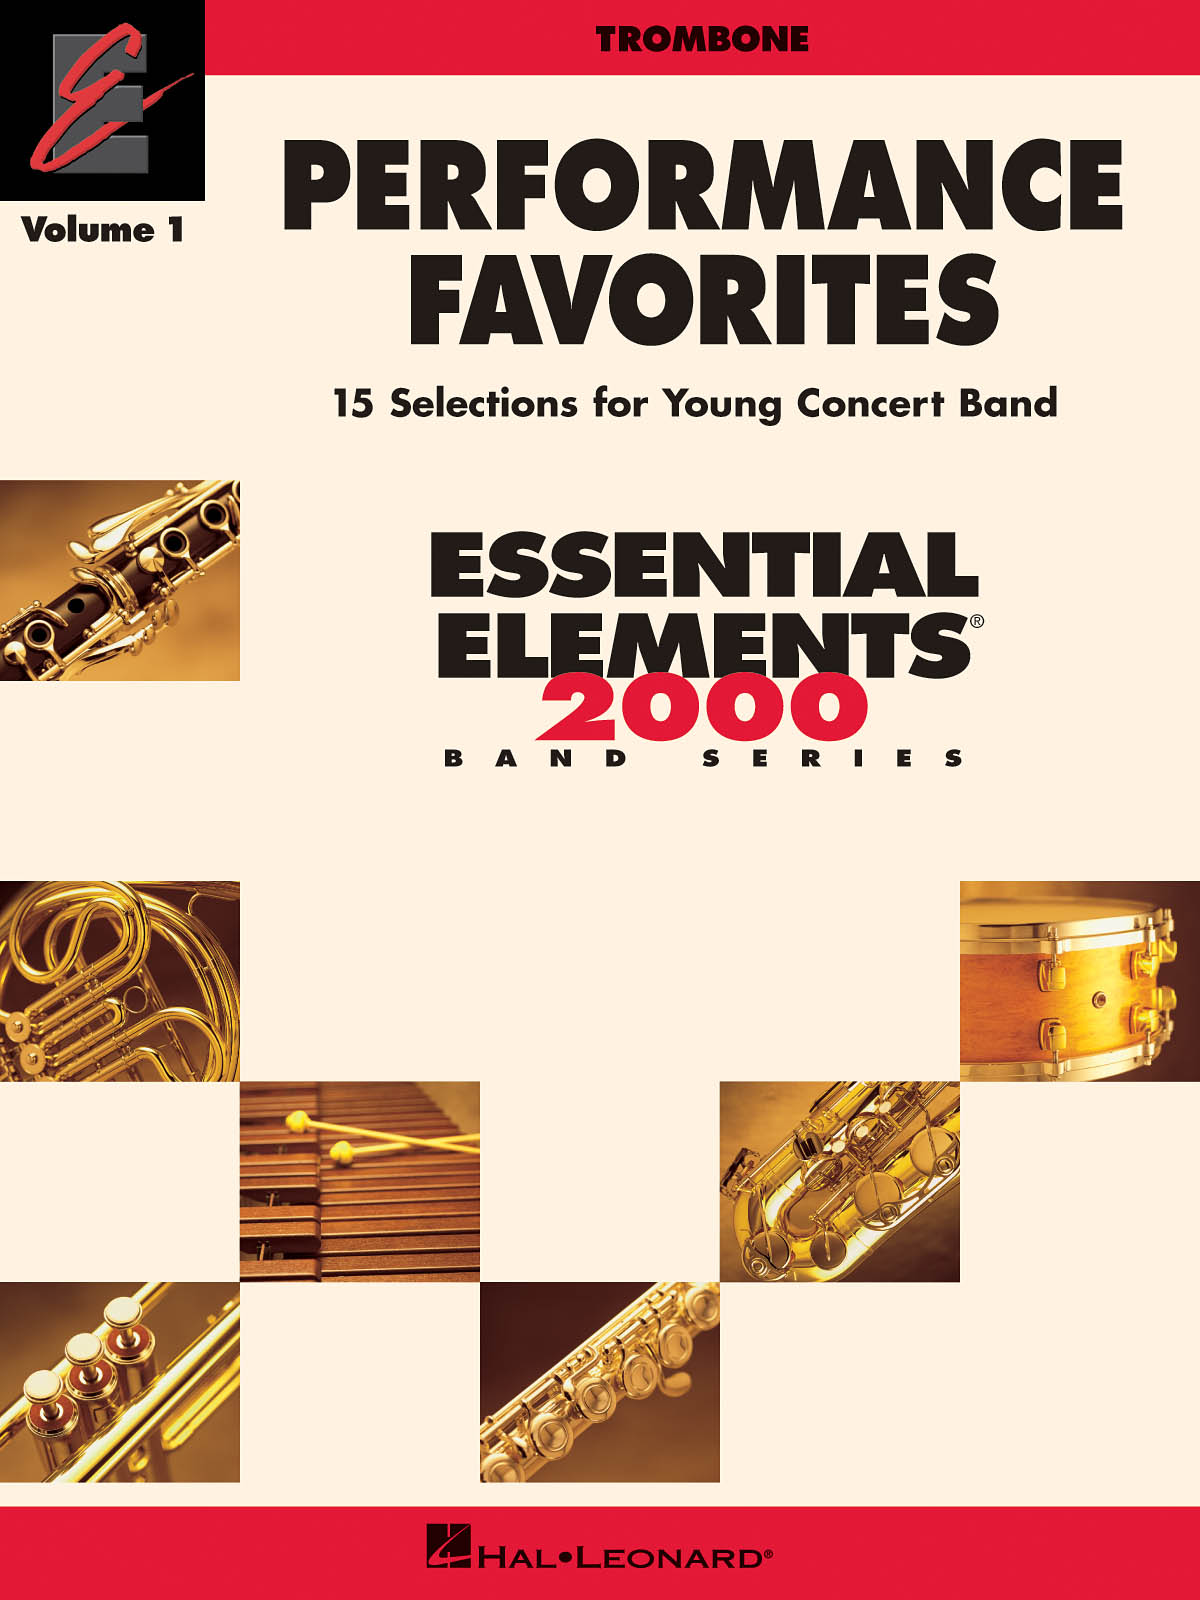 Performance Favorites Vol. 1 - Trombone - 15 Selections for Young Concert Band - noty pro trombon